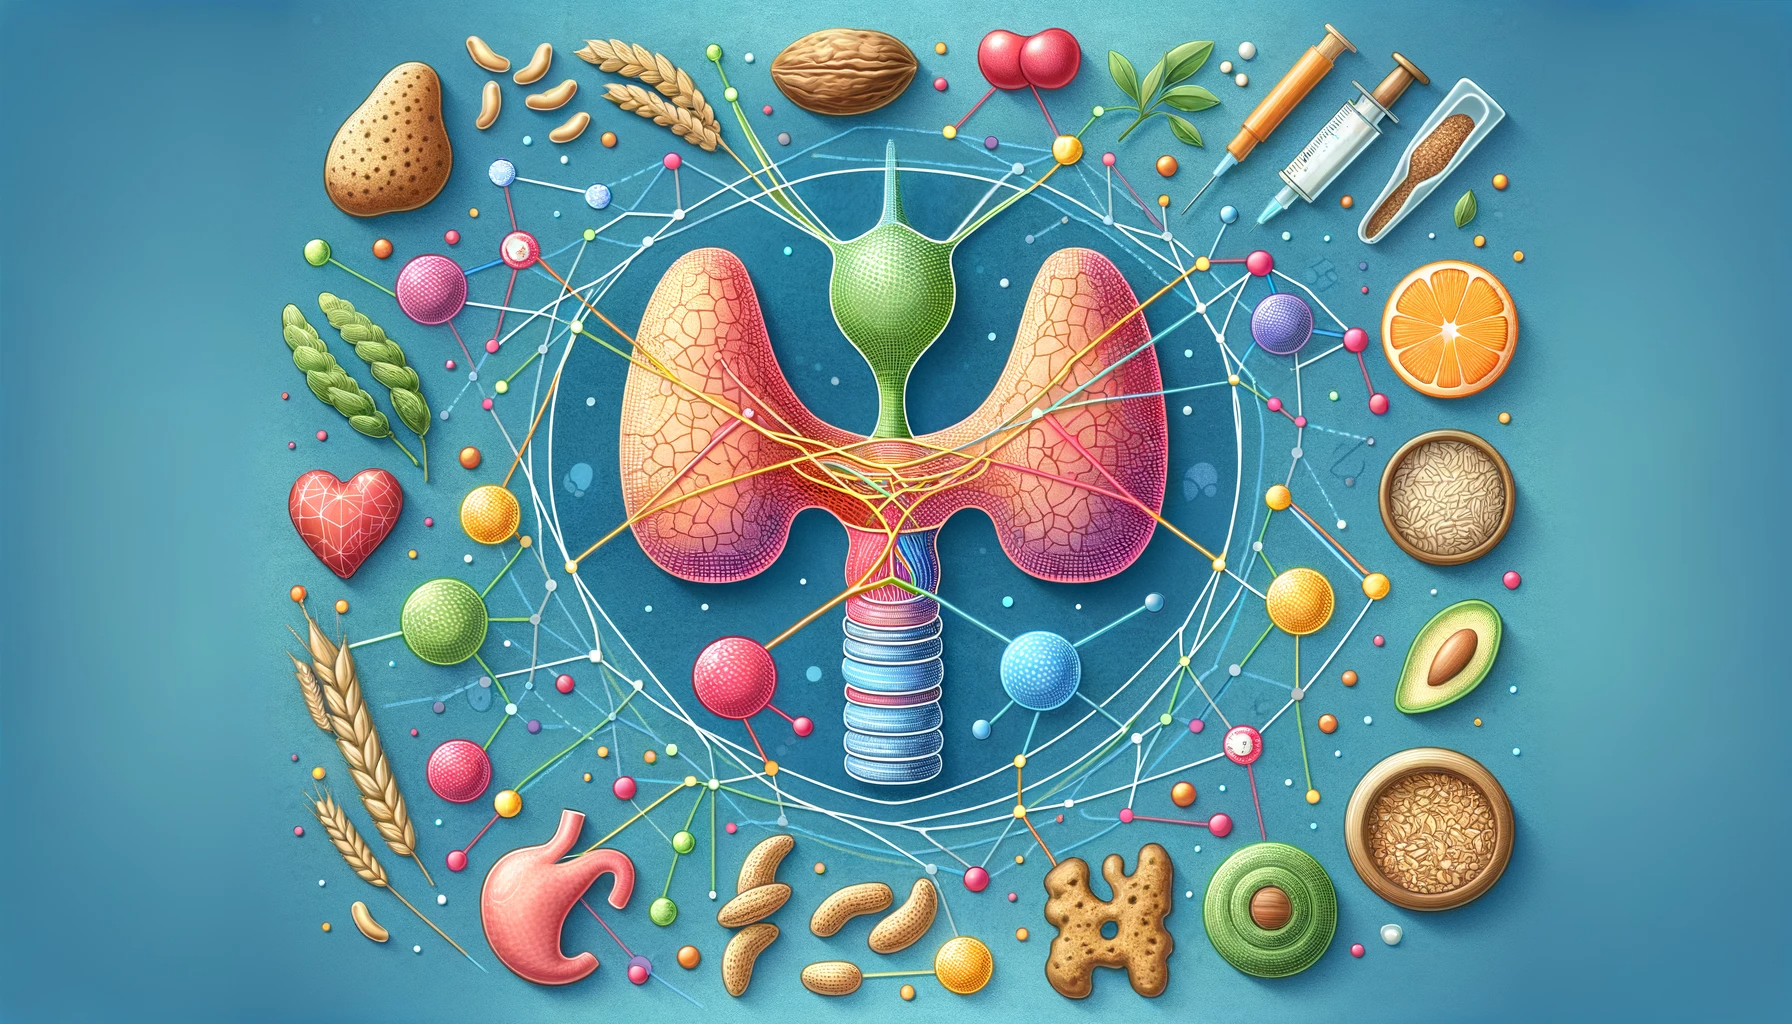 Thyroid, Leaky Gut, and Food Allergies: Connecting the Dots